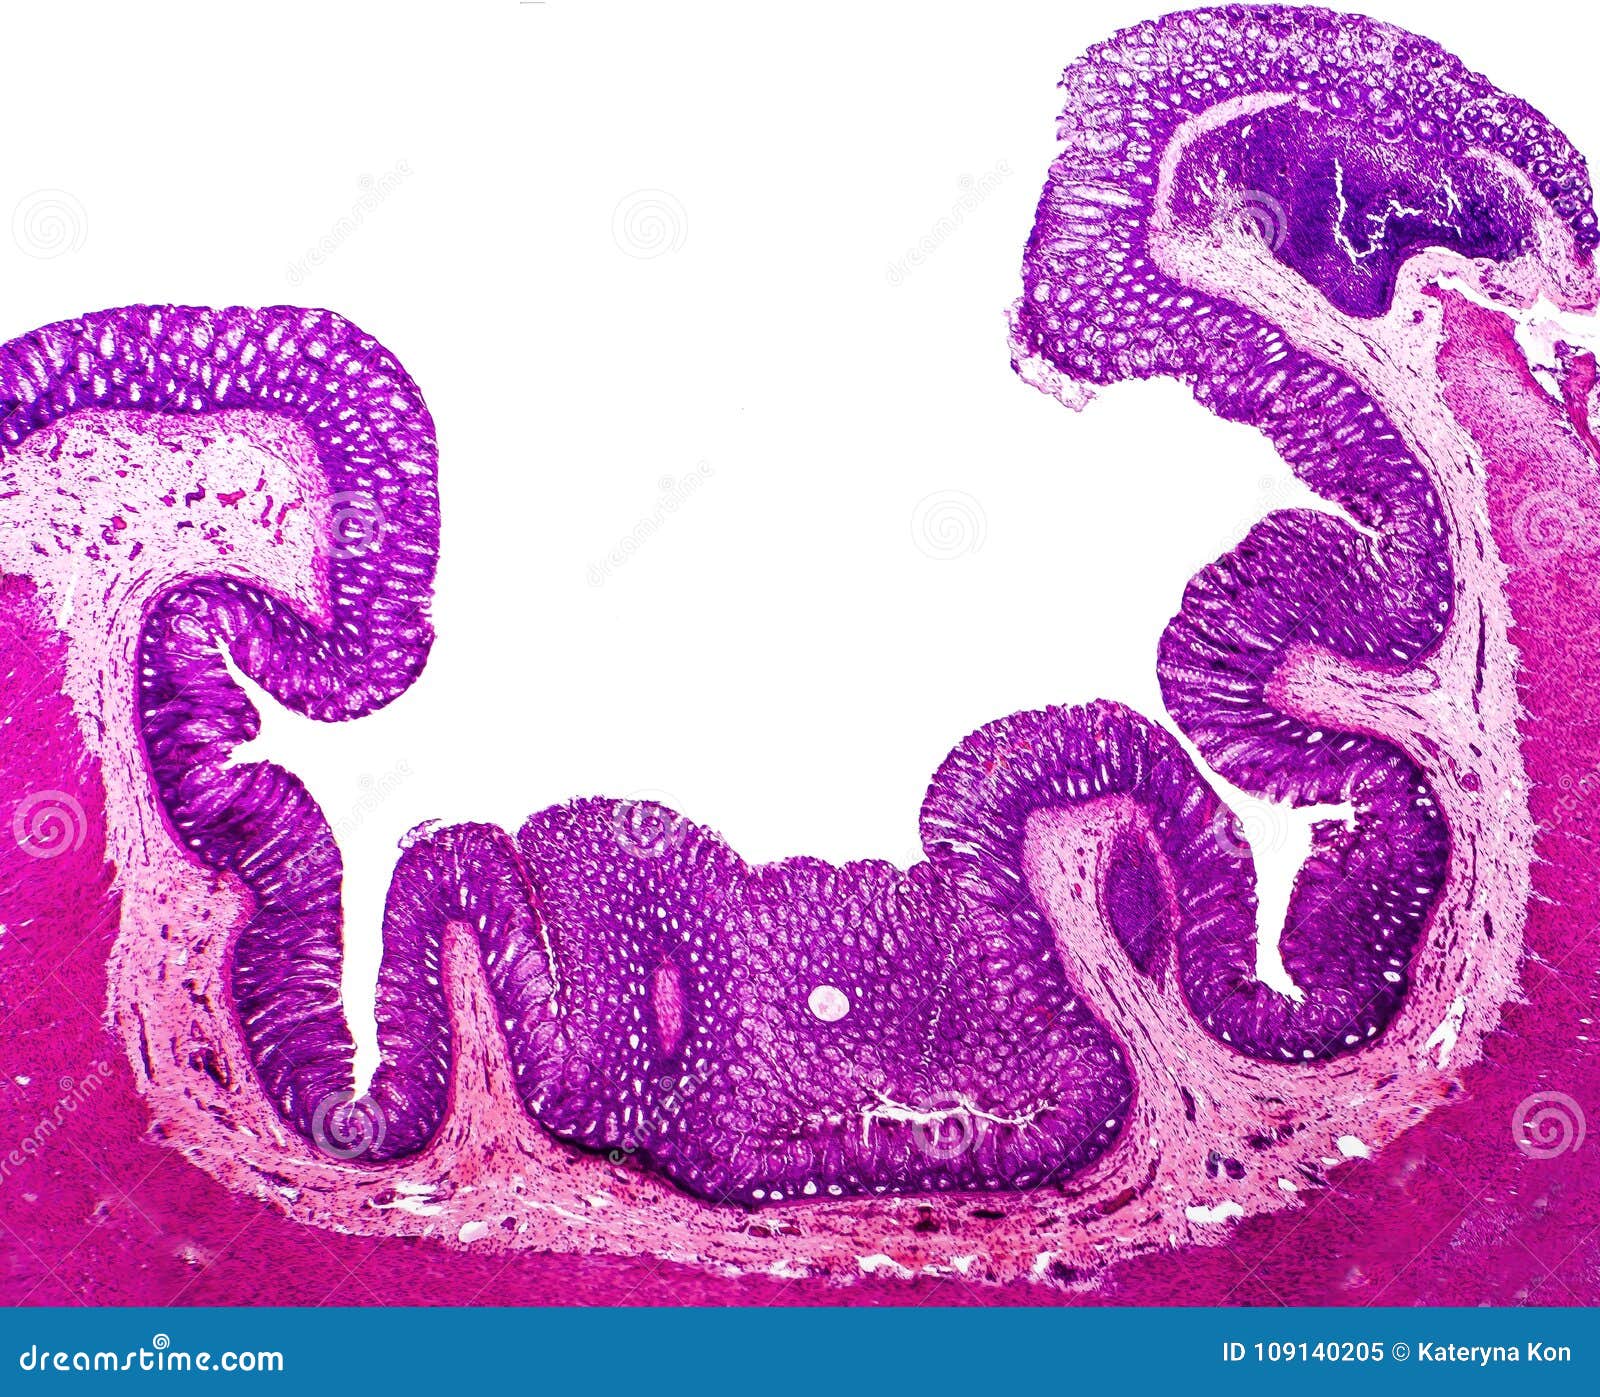 histology of human appendix, micrograph showing crypts of lieberkuhn